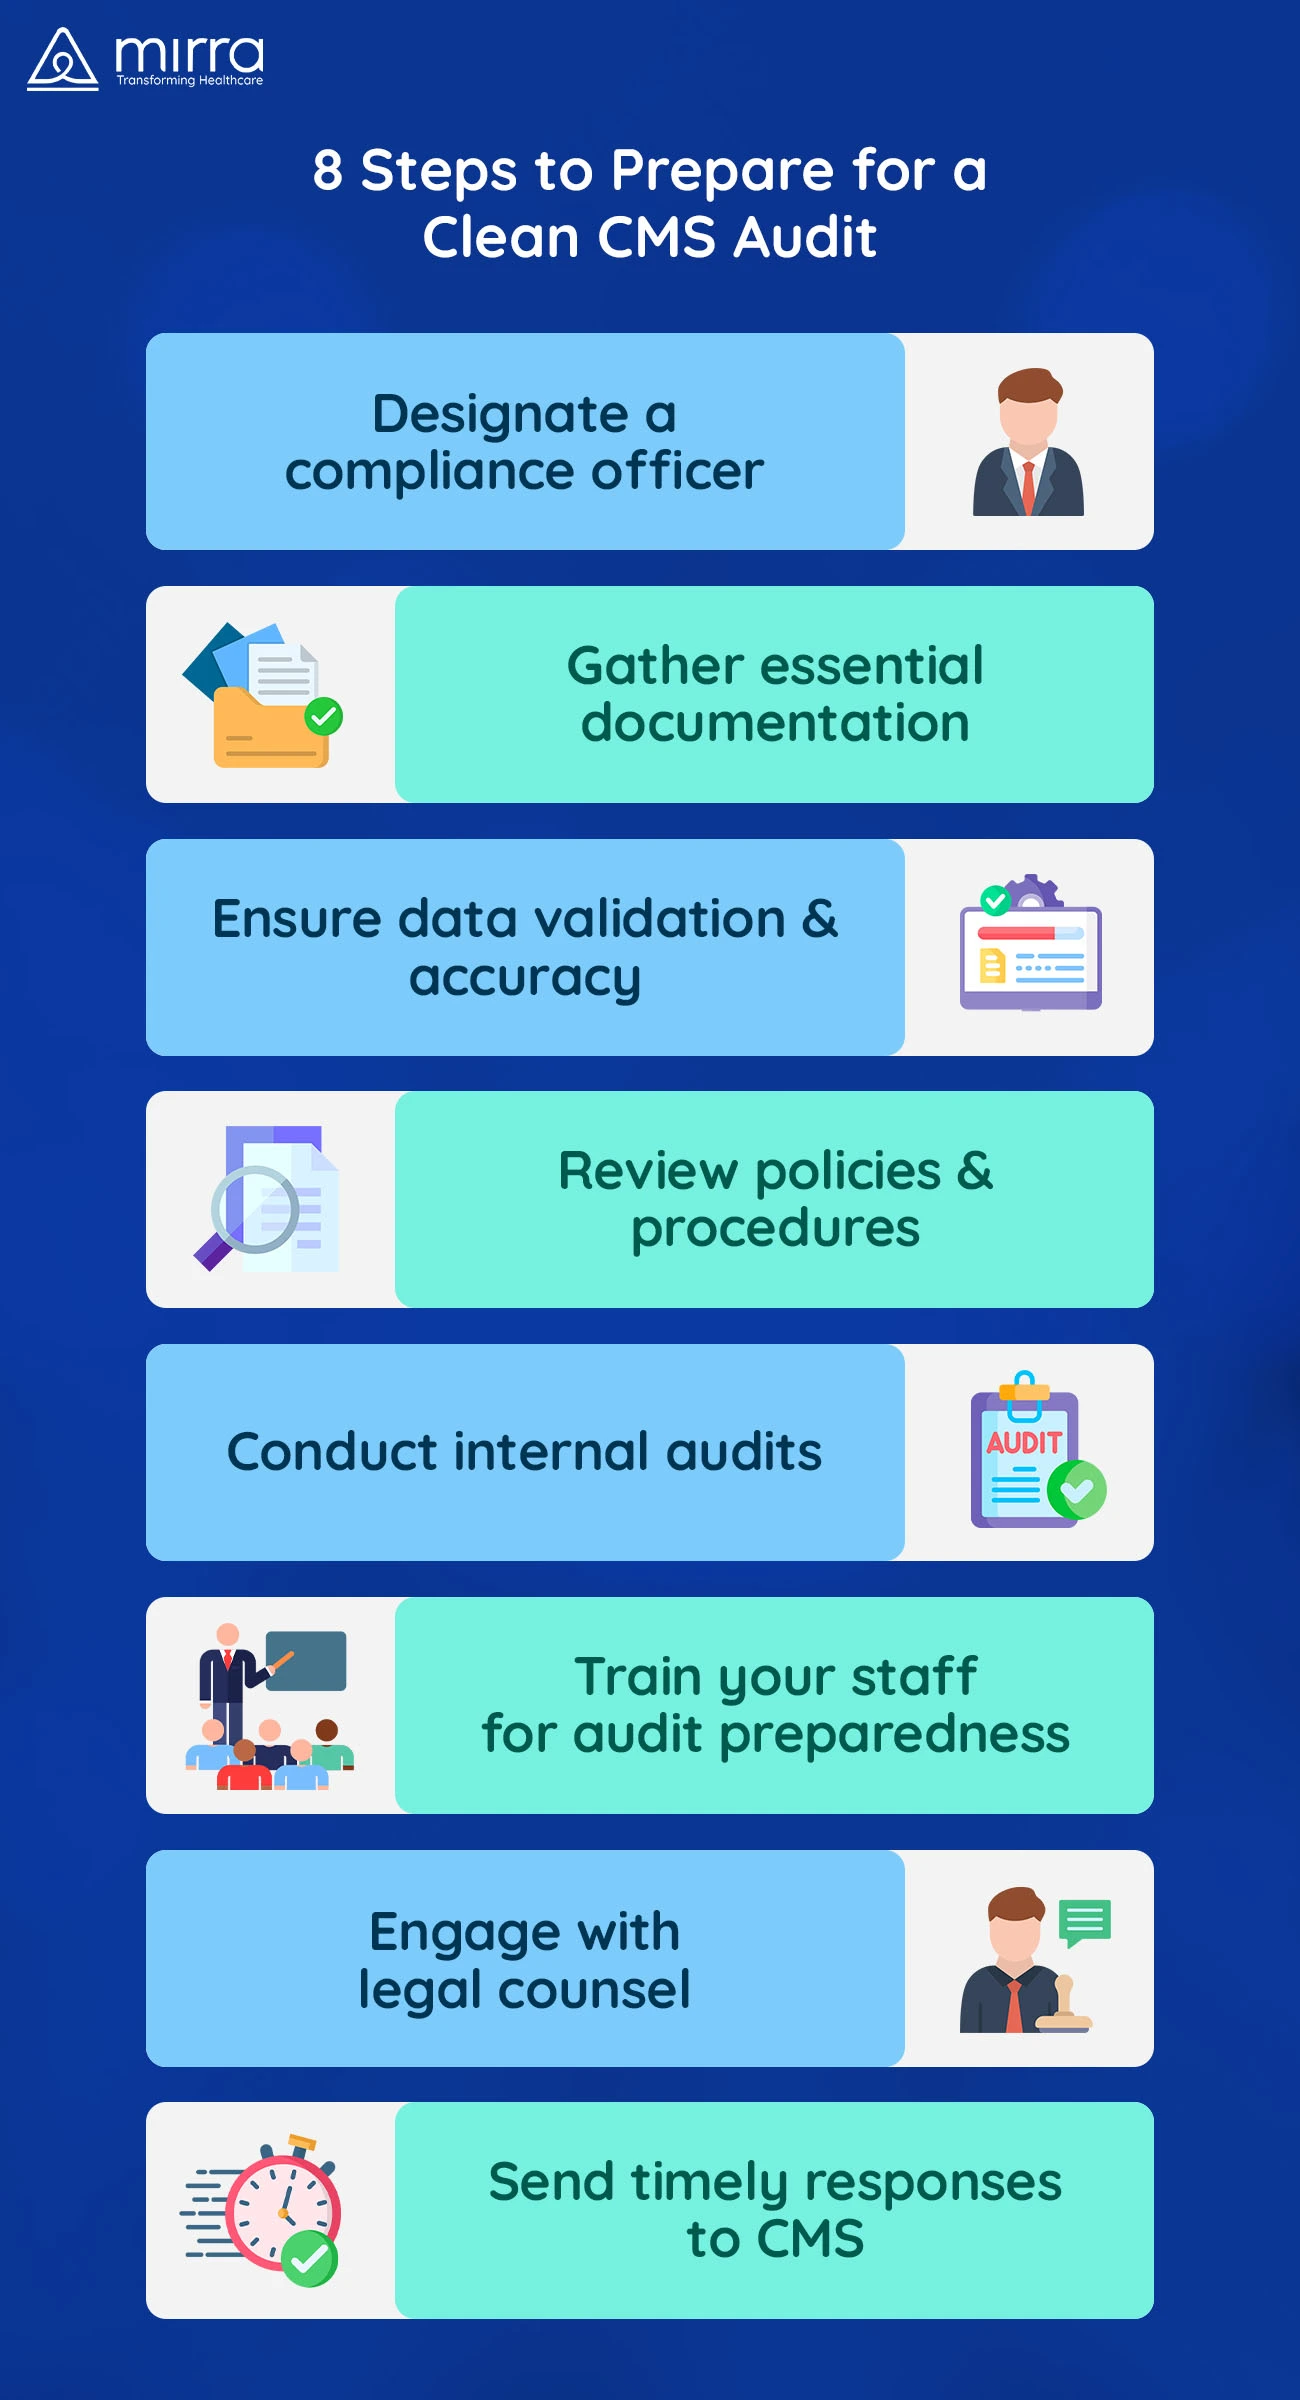 Steps to Prepare for a Clean Audit